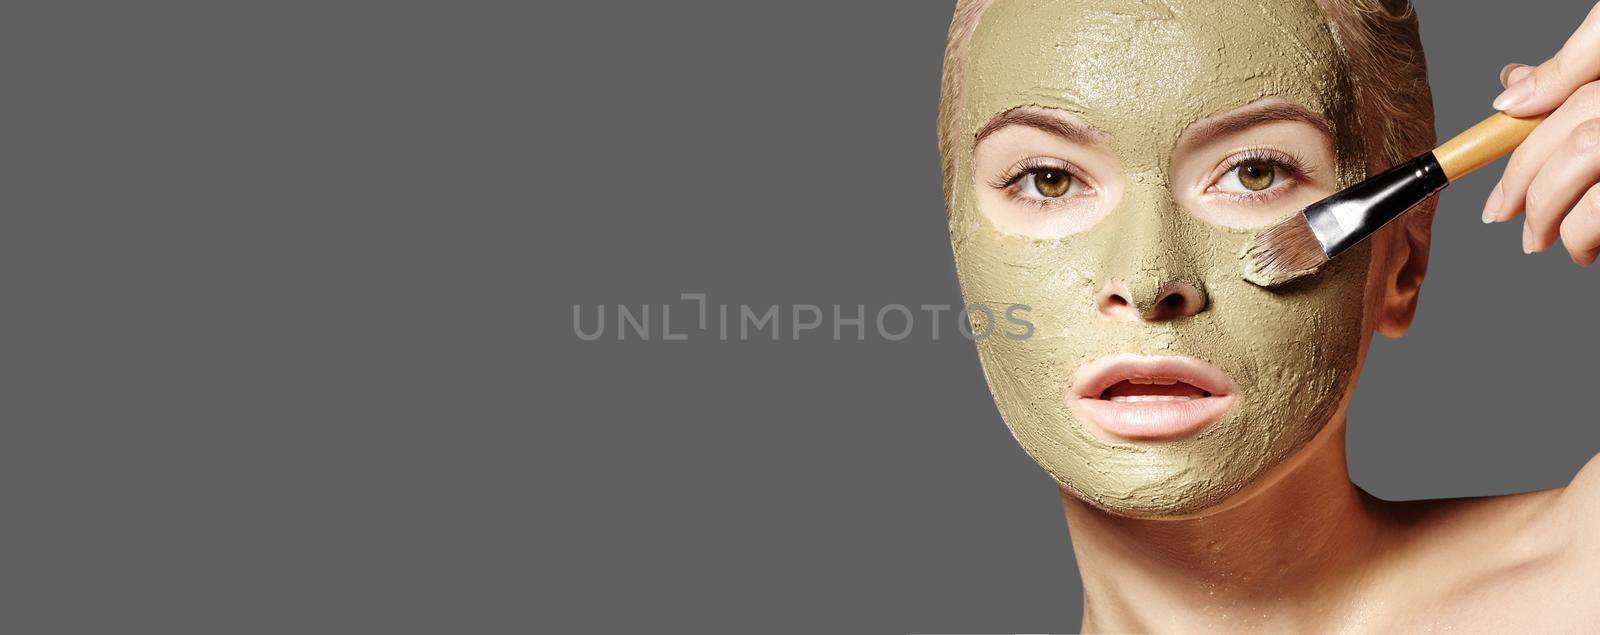 Beautiful Woman Applying Green Facial Mask. Beauty Treatments. Close-up Portrait of Spa Girl Apply Clay Facial mask on grey background.